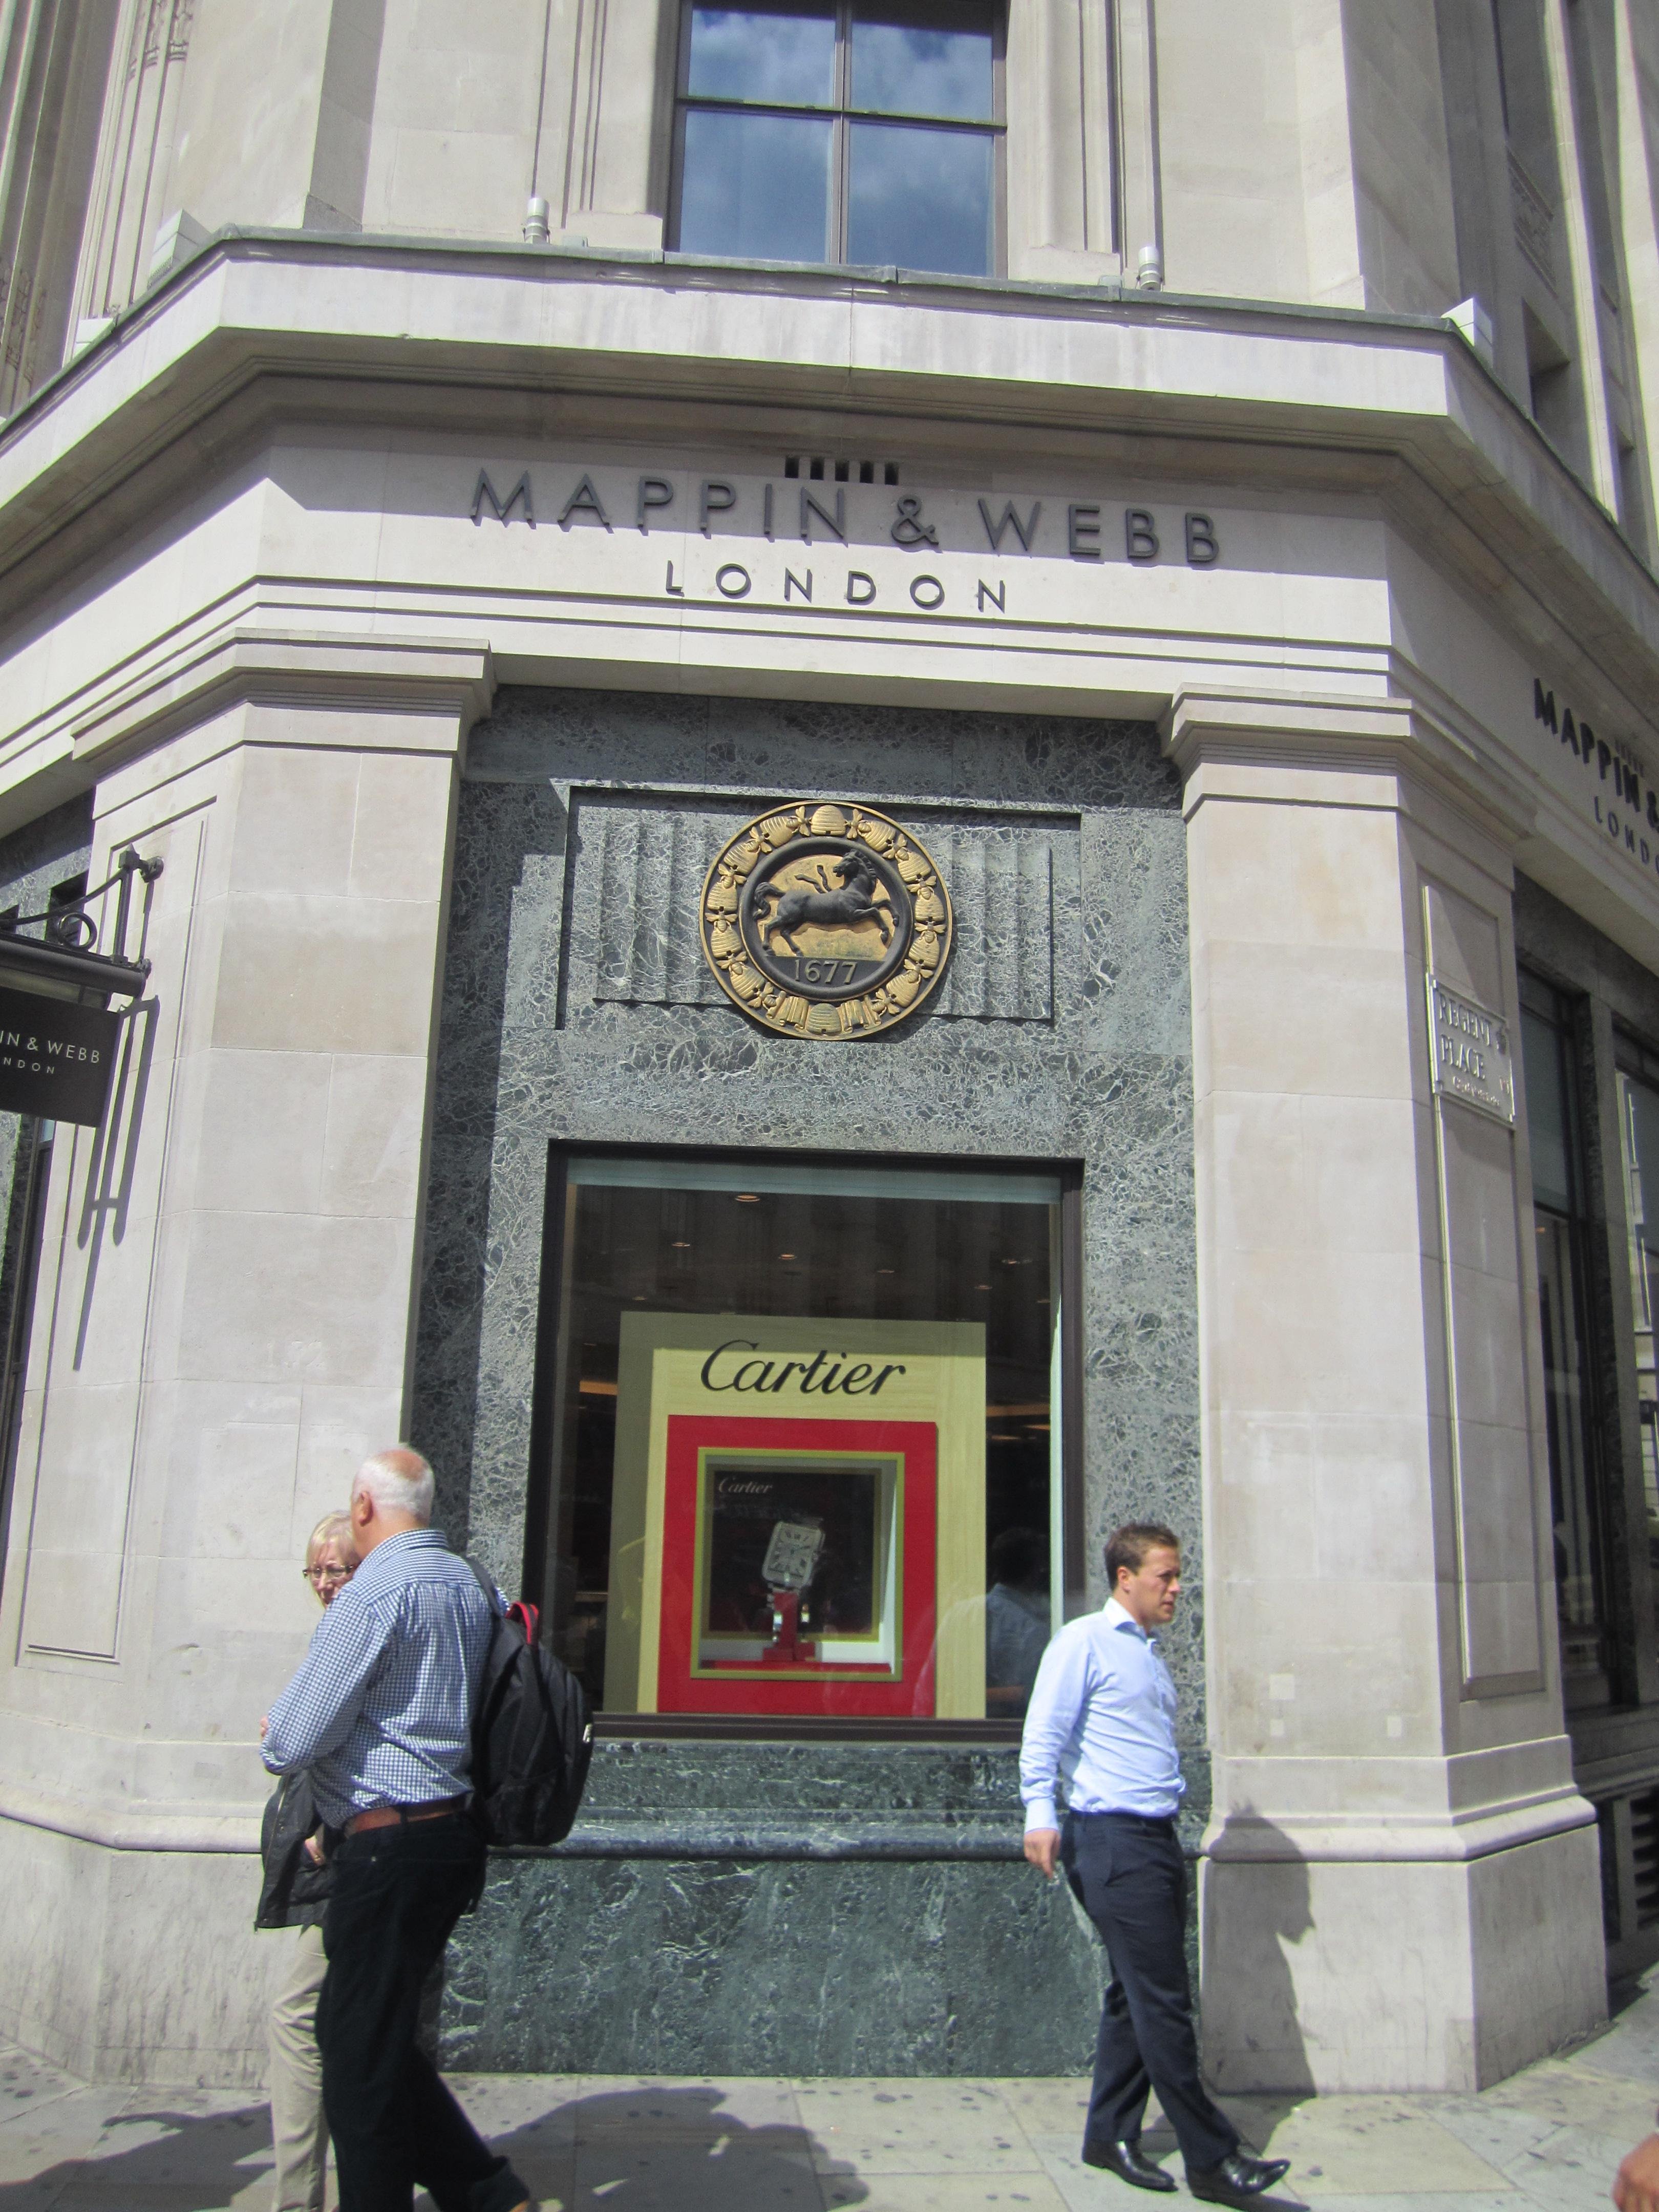 Mappin and Webb in London: 1 reviews and 3 photos